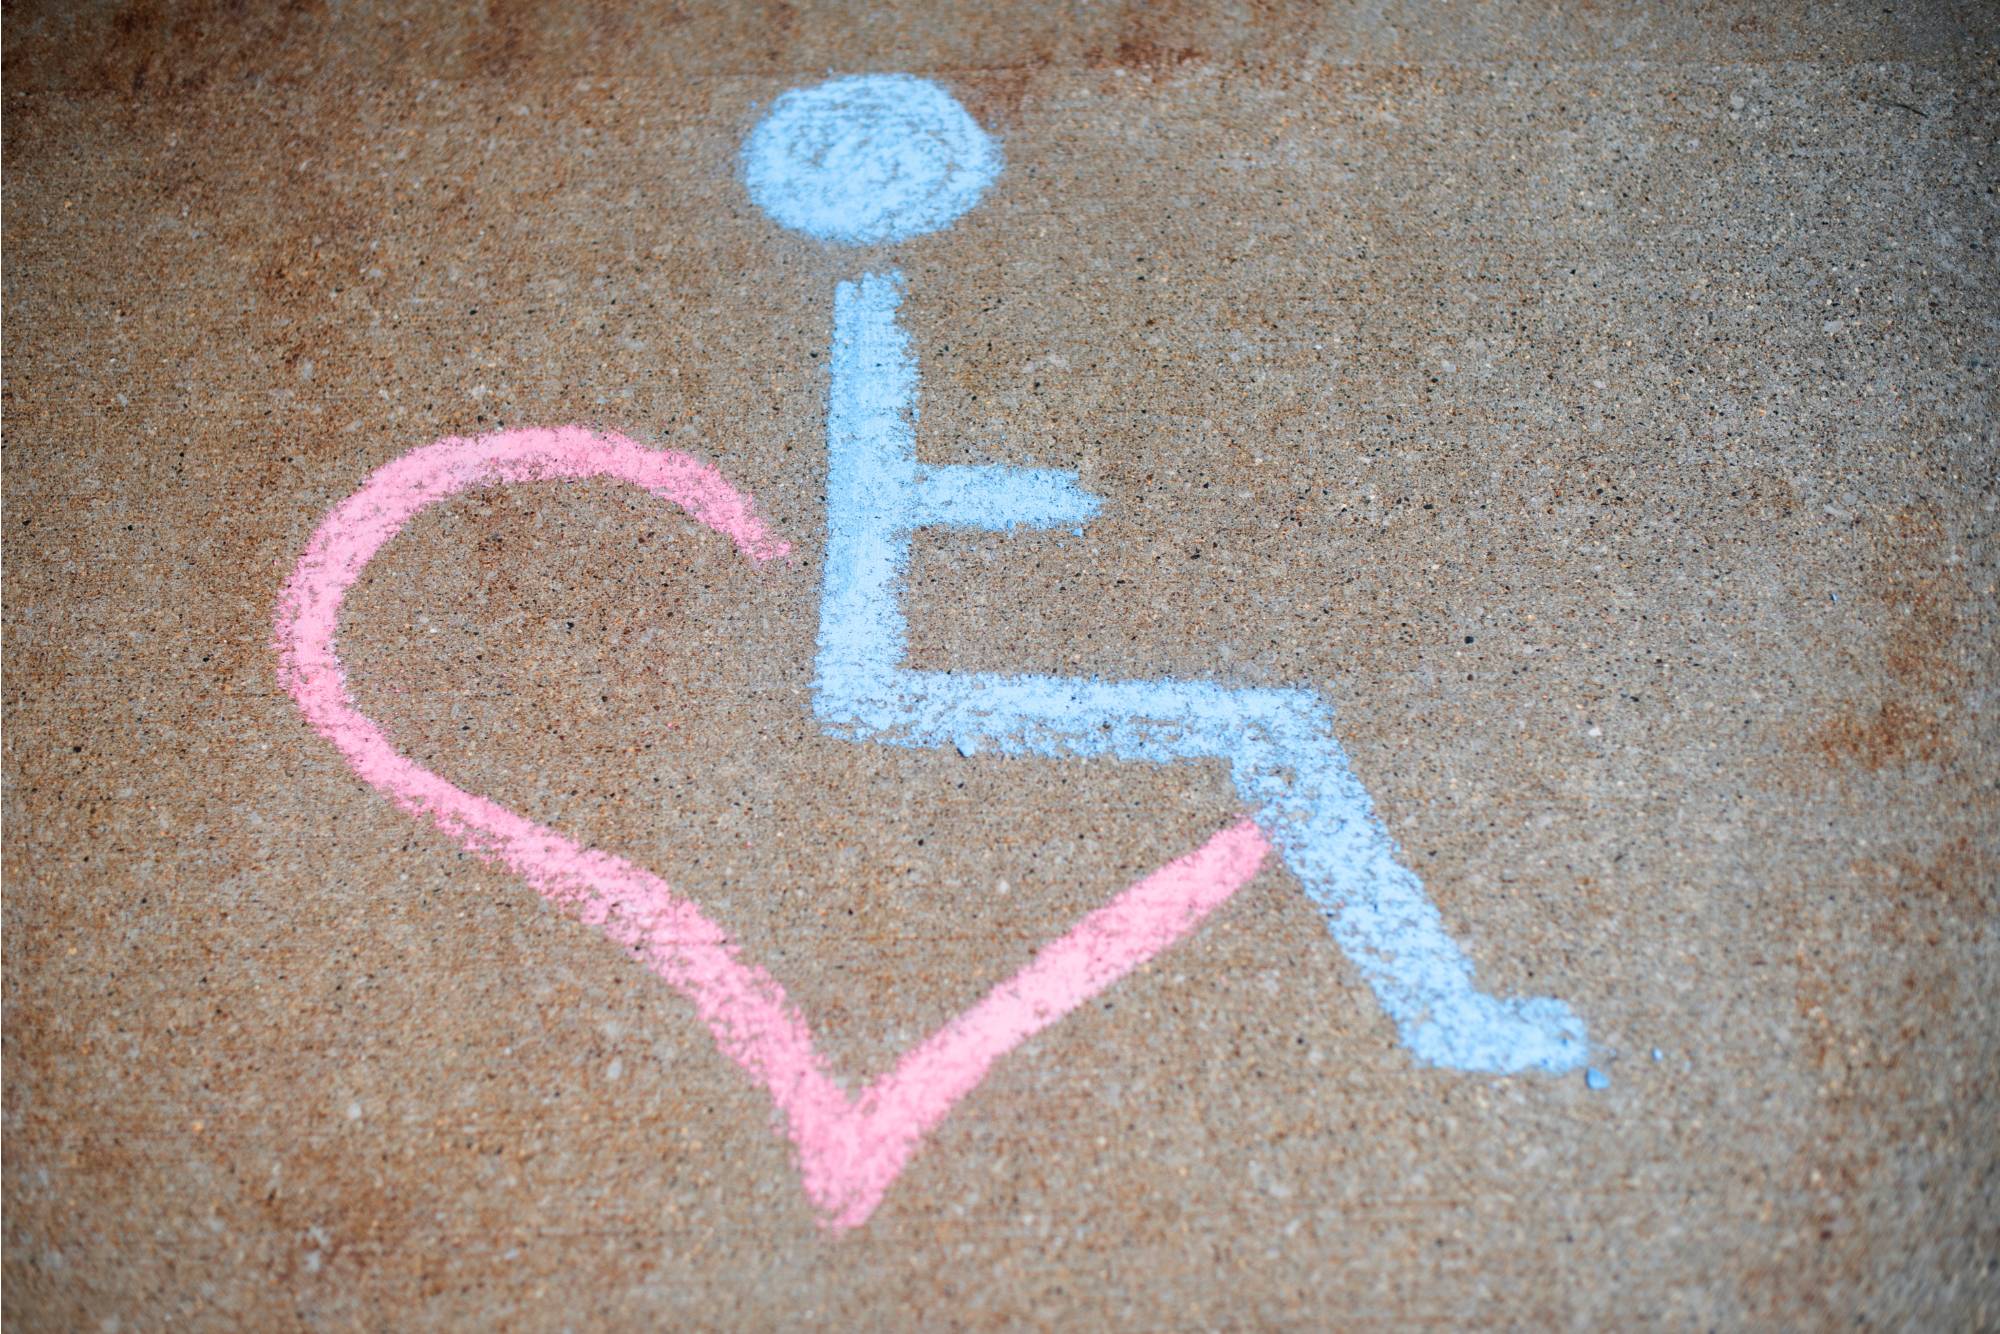 Chalk drawing of handicapped symbol with a heart integrated into the bottom left